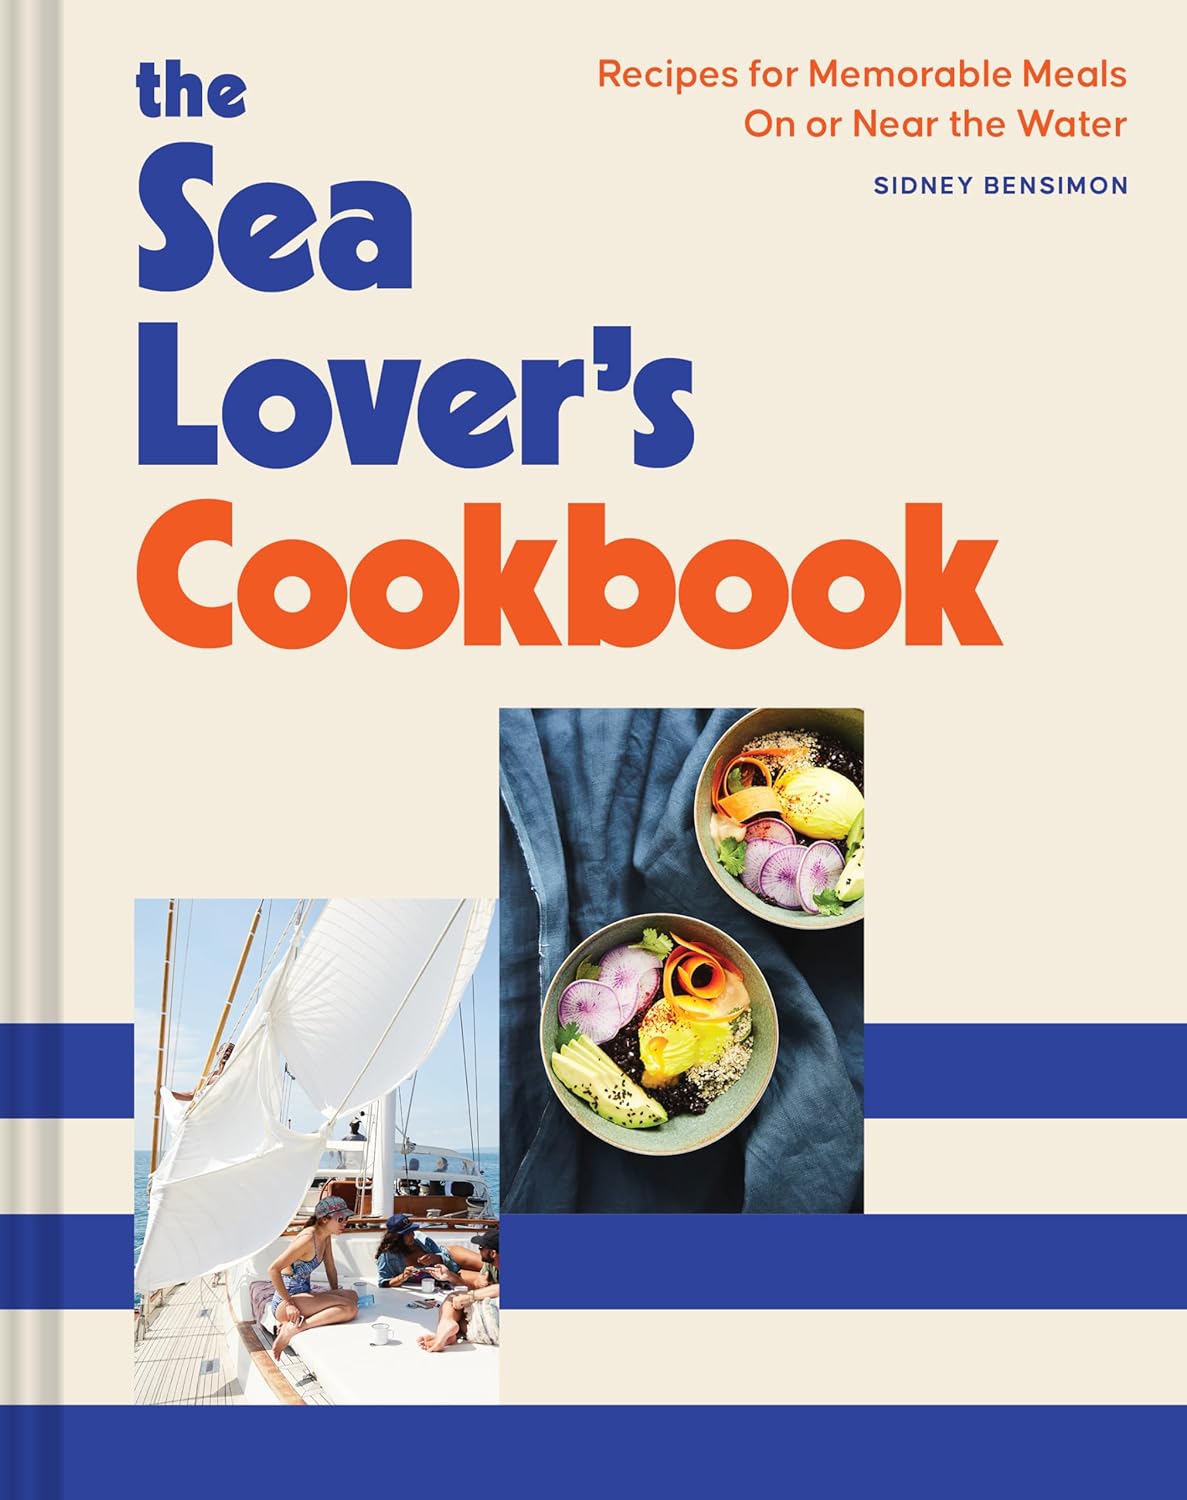 *Pre-order* The Sea Lover's Cookbook: Recipes for Memorable Meals on or near the Water (Sidney Bensimon)